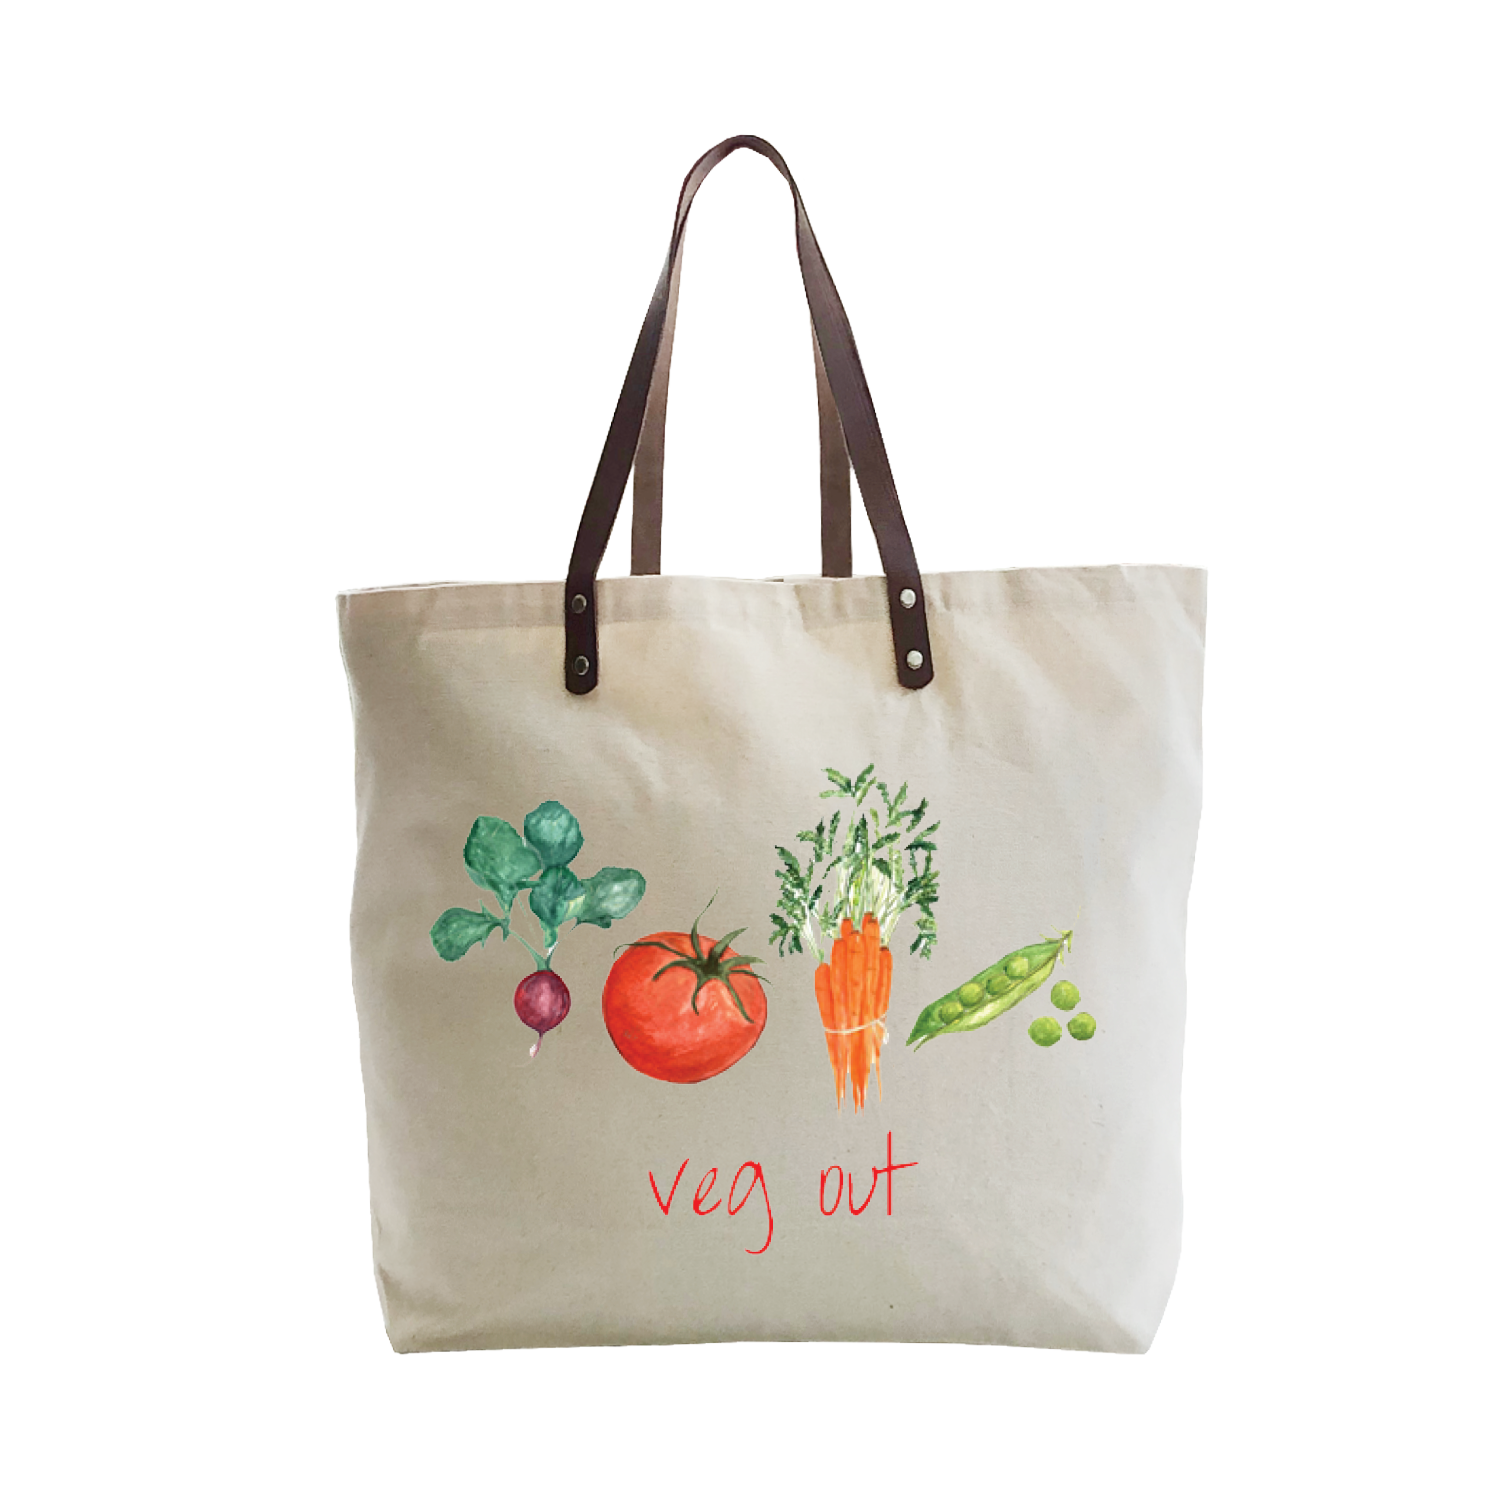 veg out large tote